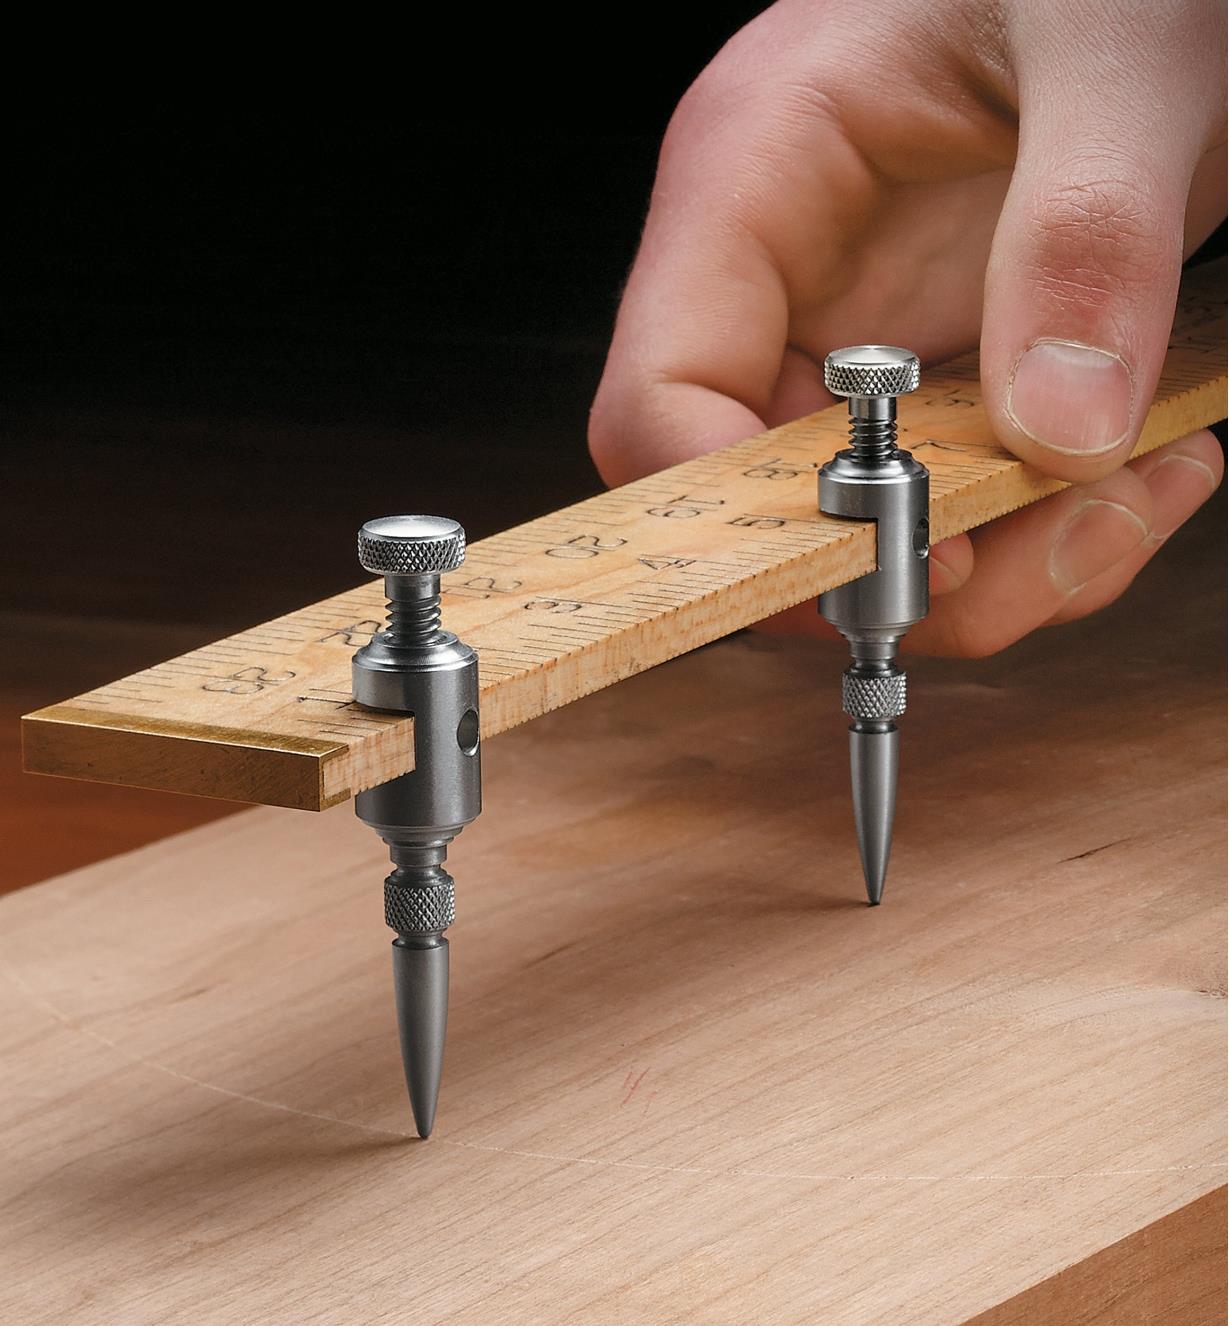 Veritas Trammel Points clamped to a wooden ruler